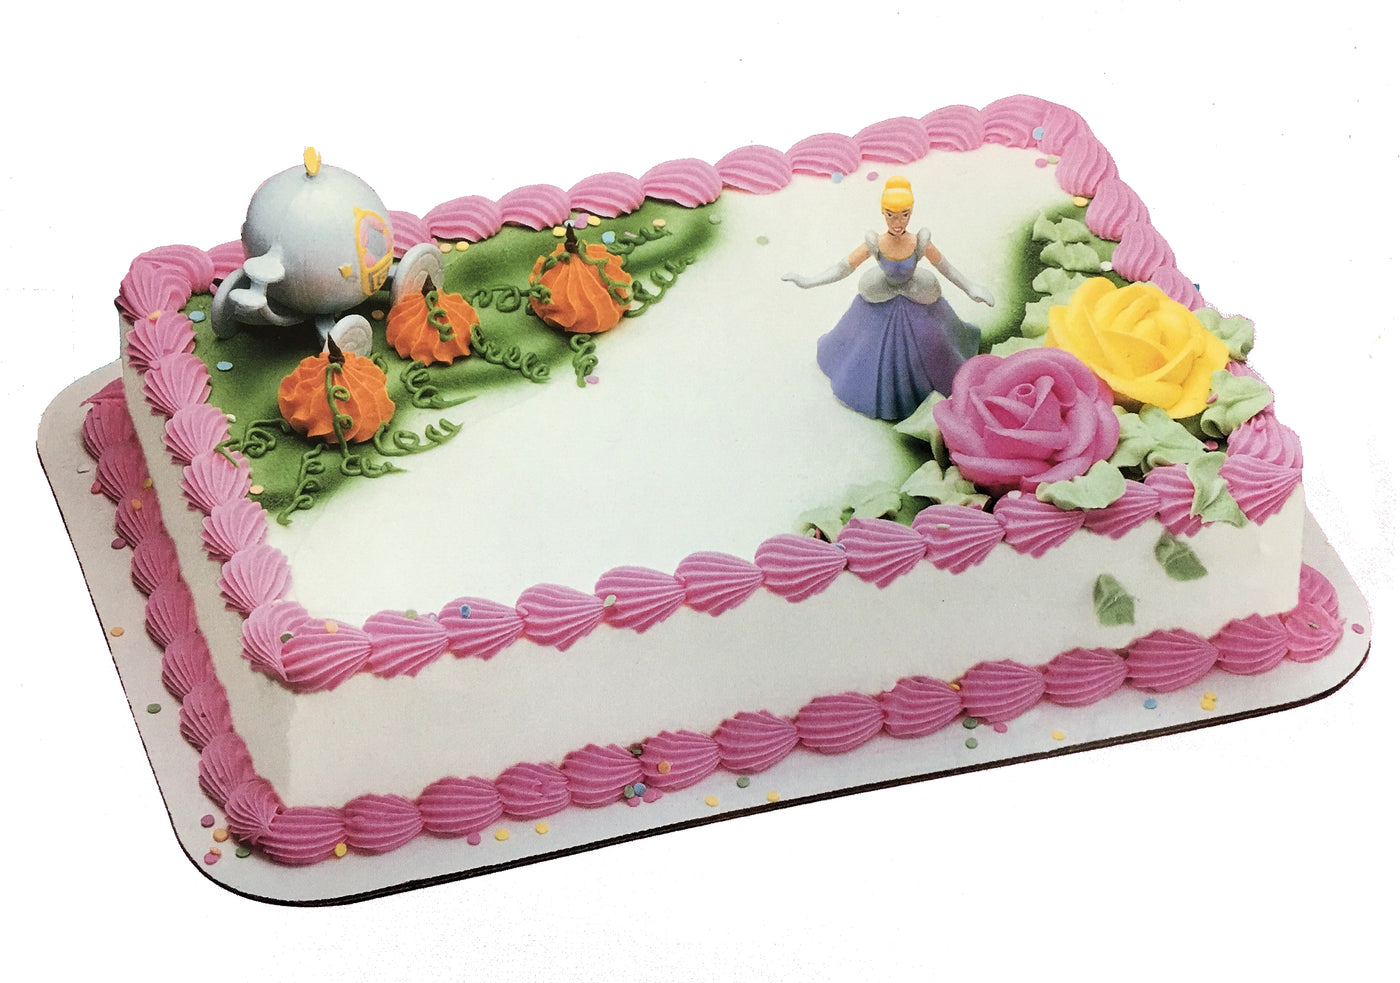 Cake Topper Cinderella, beautiful on top of your wedding cake!